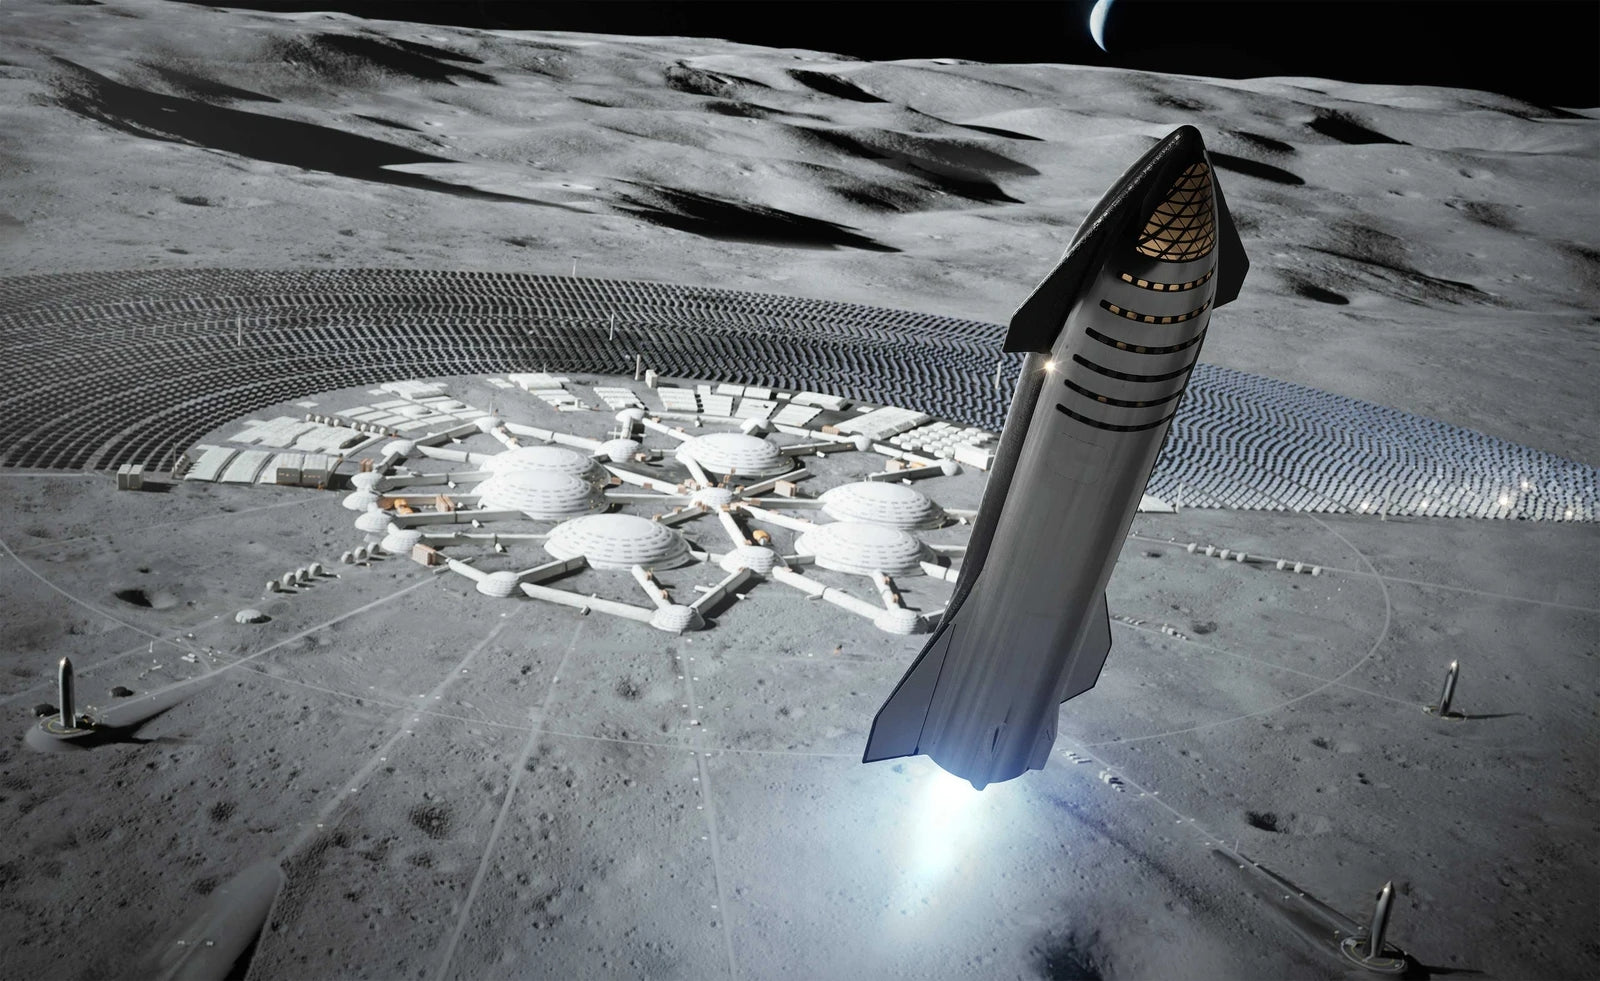 SpaceX Aims To Land NASA Astronauts On The Moon By 2024 –‘We Need To Get Back There & Have A Permanent Base,’ says Elon Musk